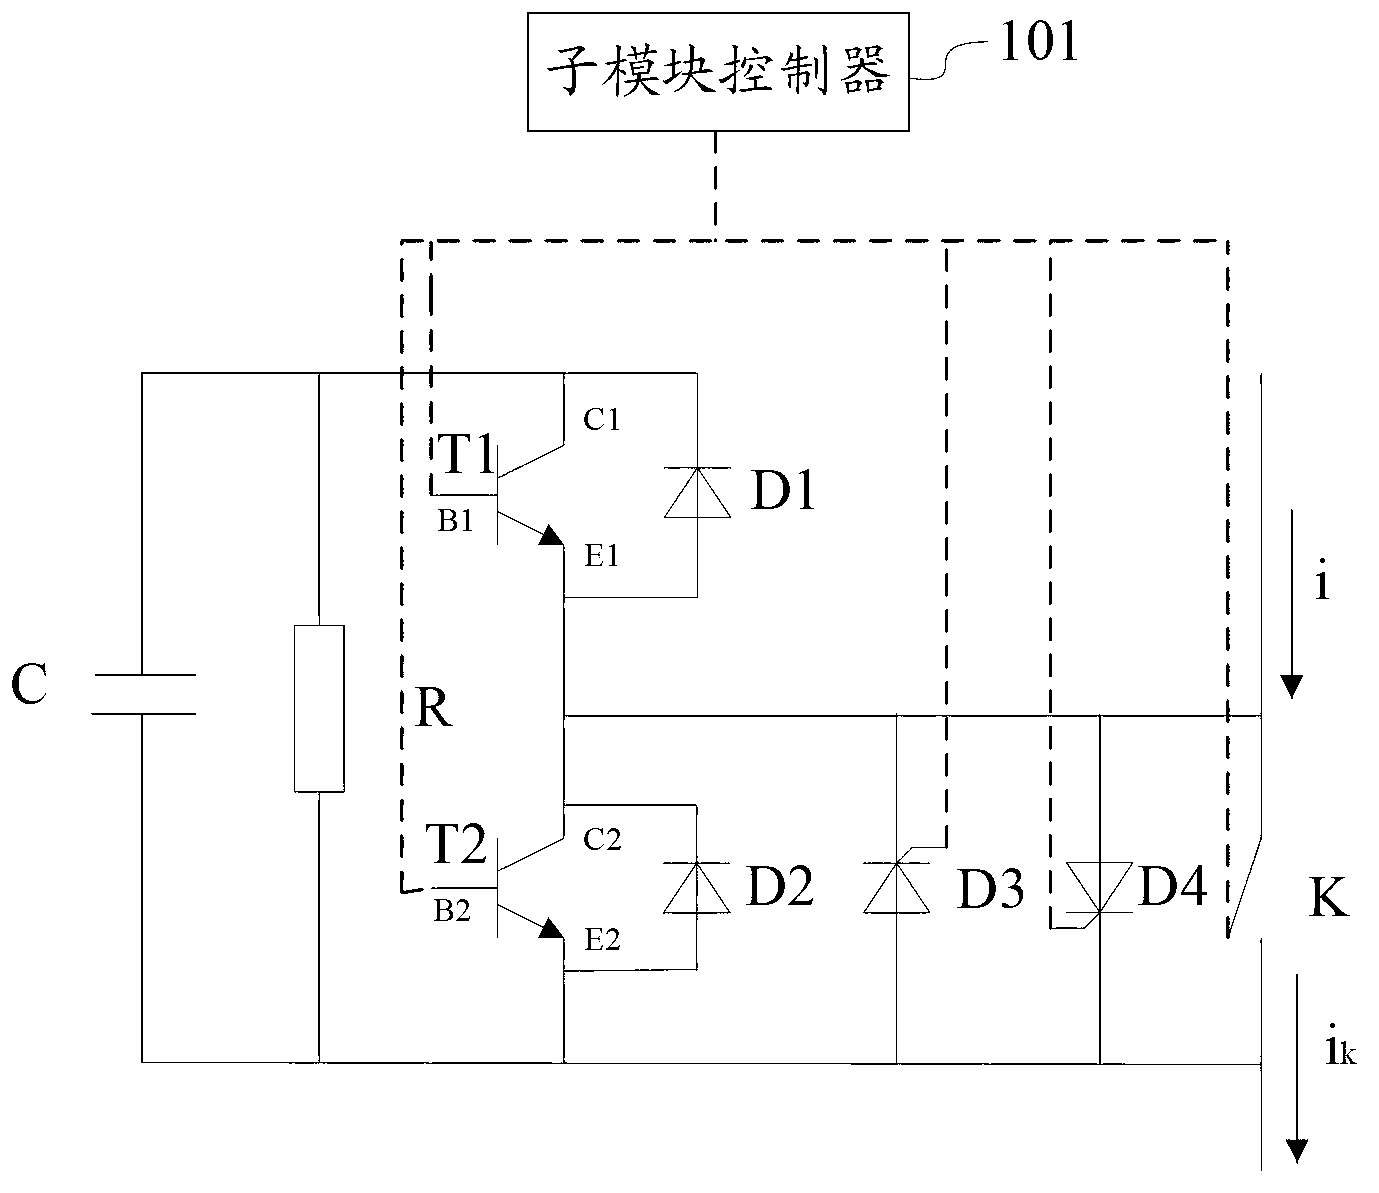 Fault protection circuit and method for submodule of modular multilevel converter